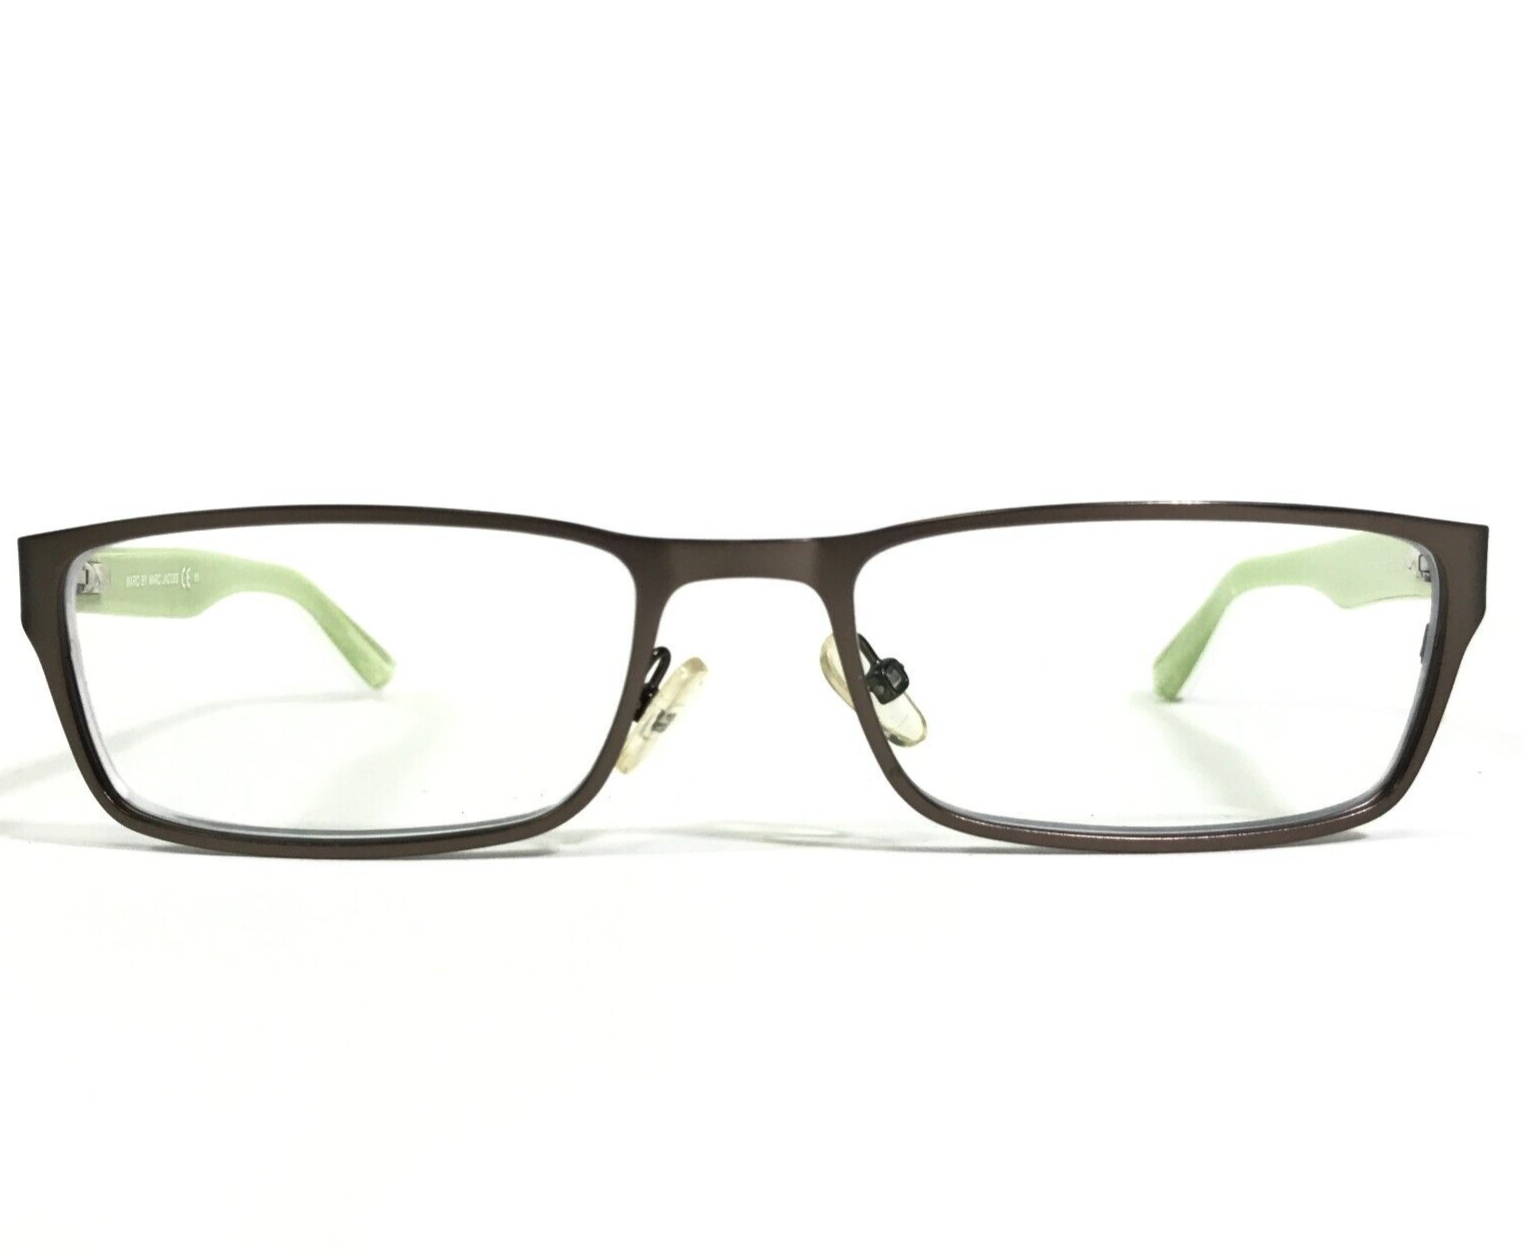 Marc By Marc Jacobs Eyeglasses Frames MMJ 503 CPS Grey Green 52-17-140 - $41.86